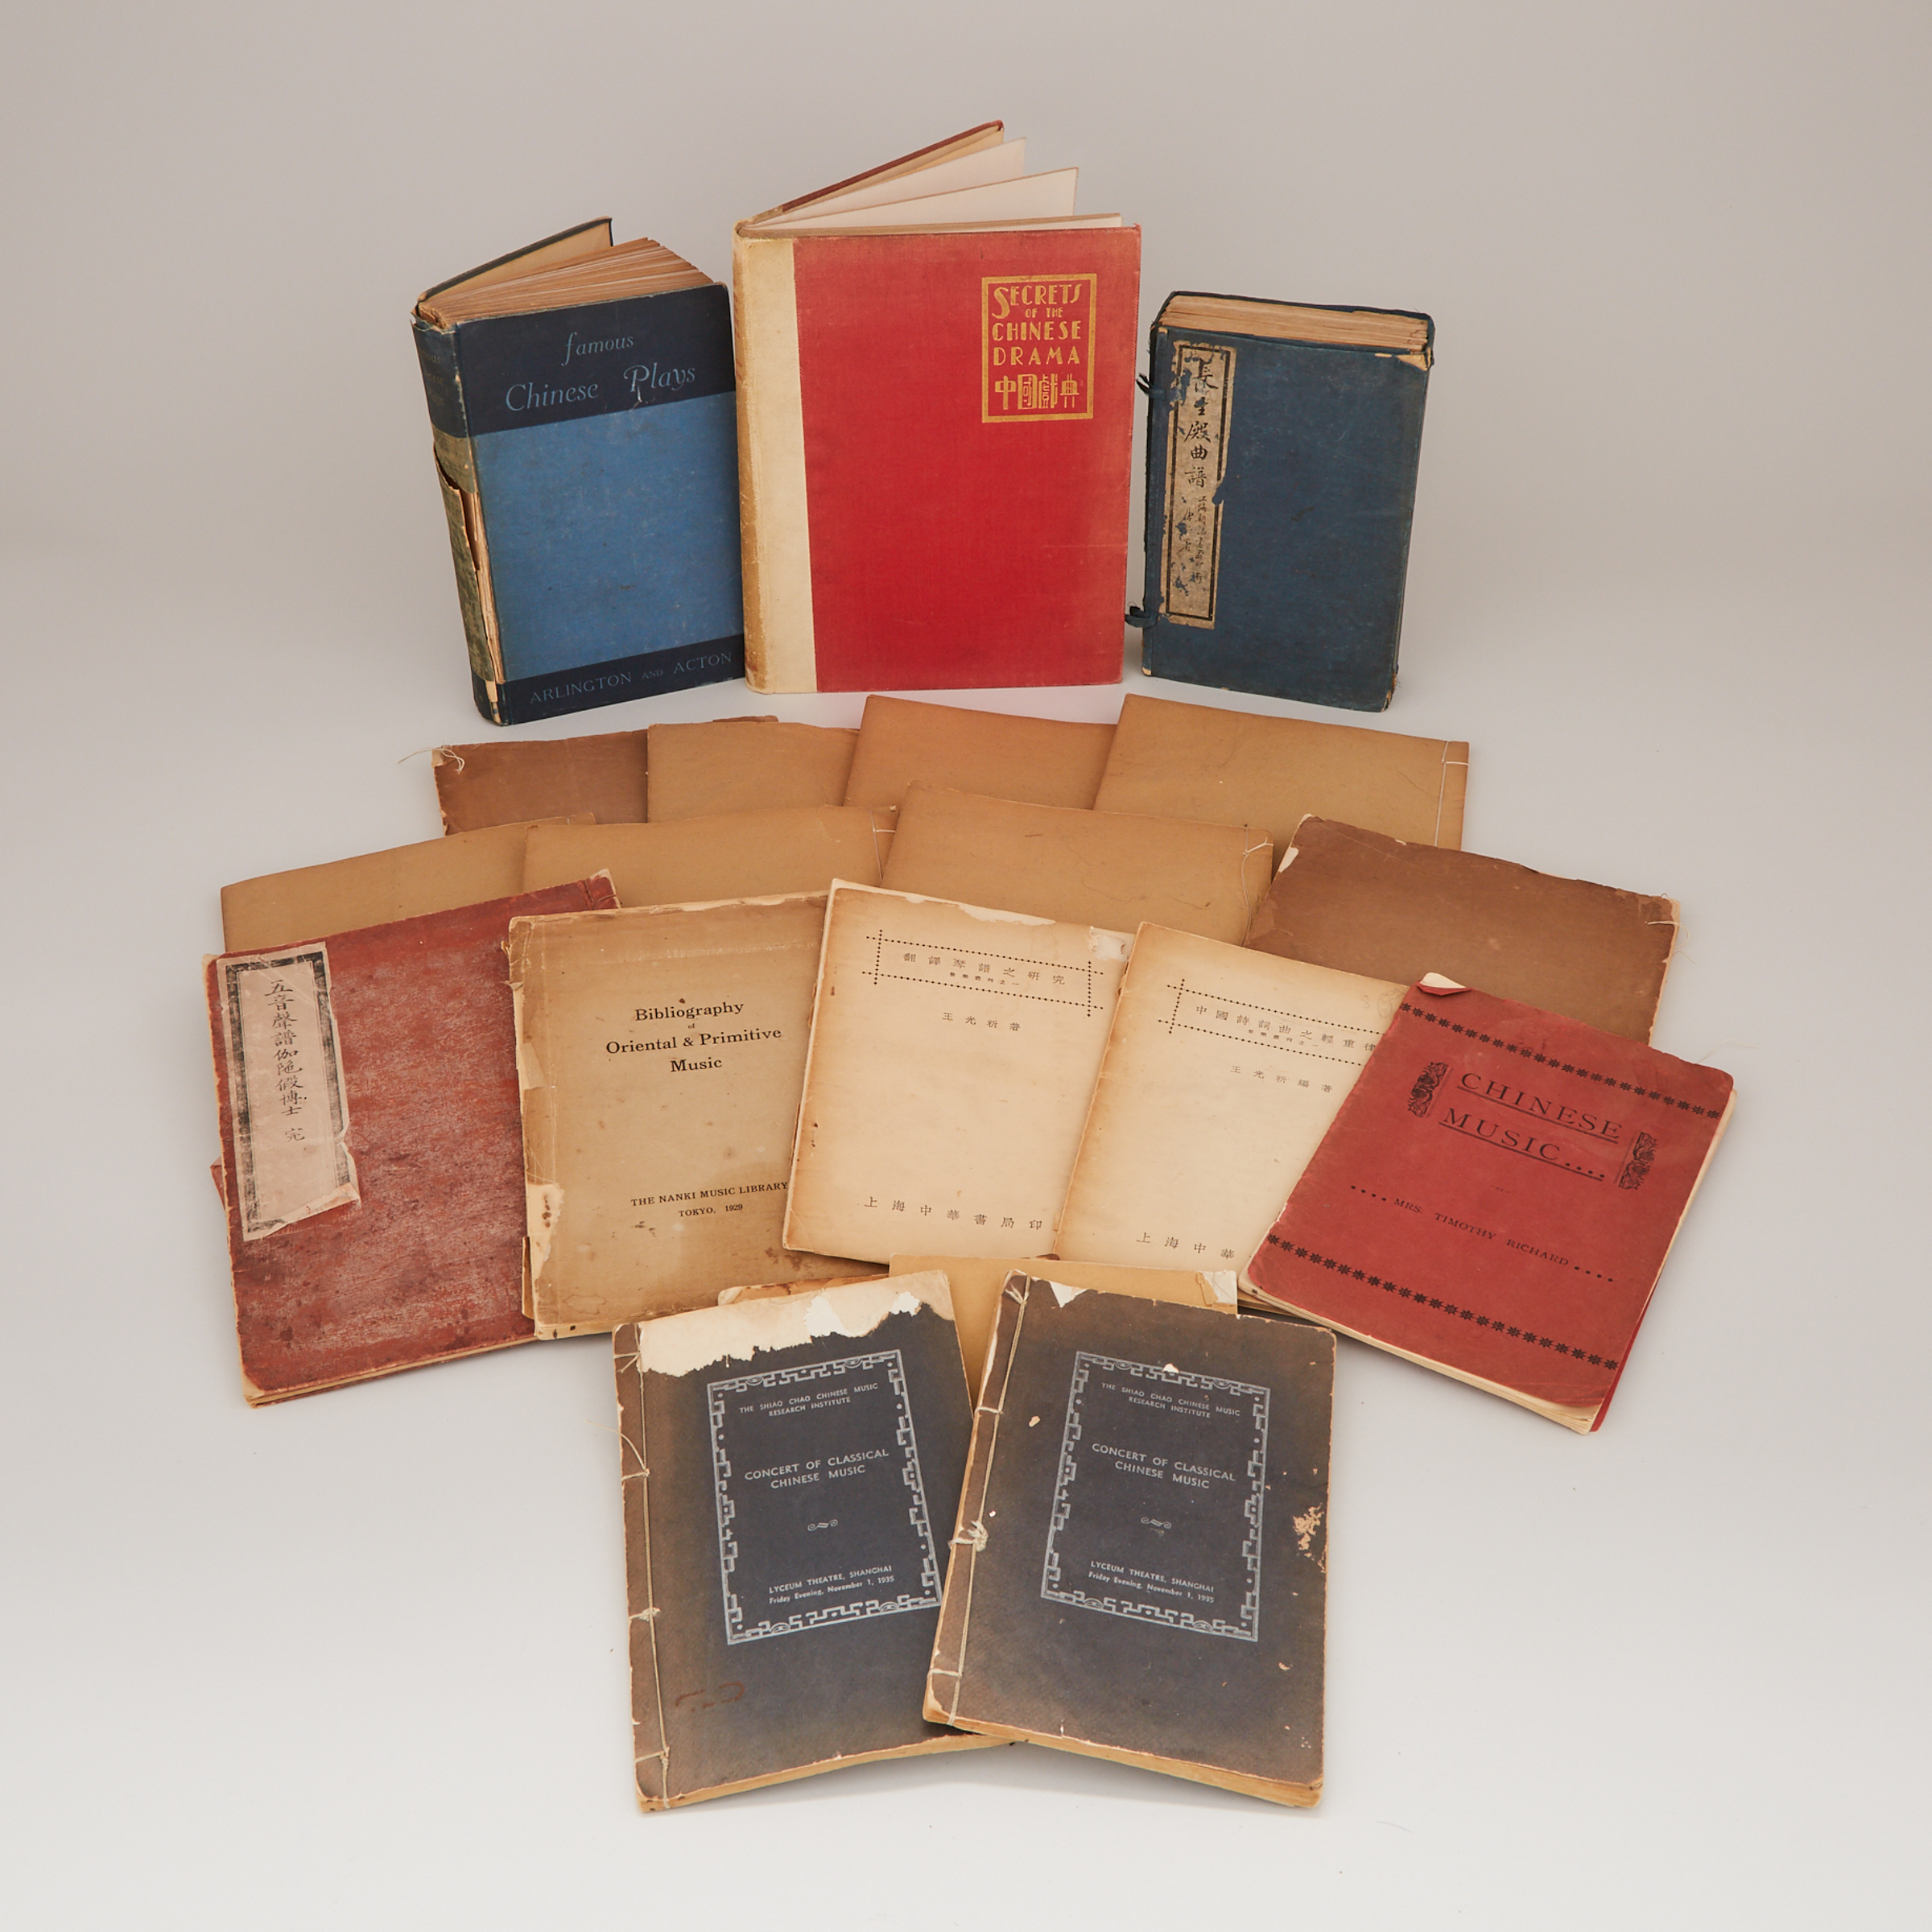 A Group of Twenty Musical Reference Books, Early to Mid-20th Century